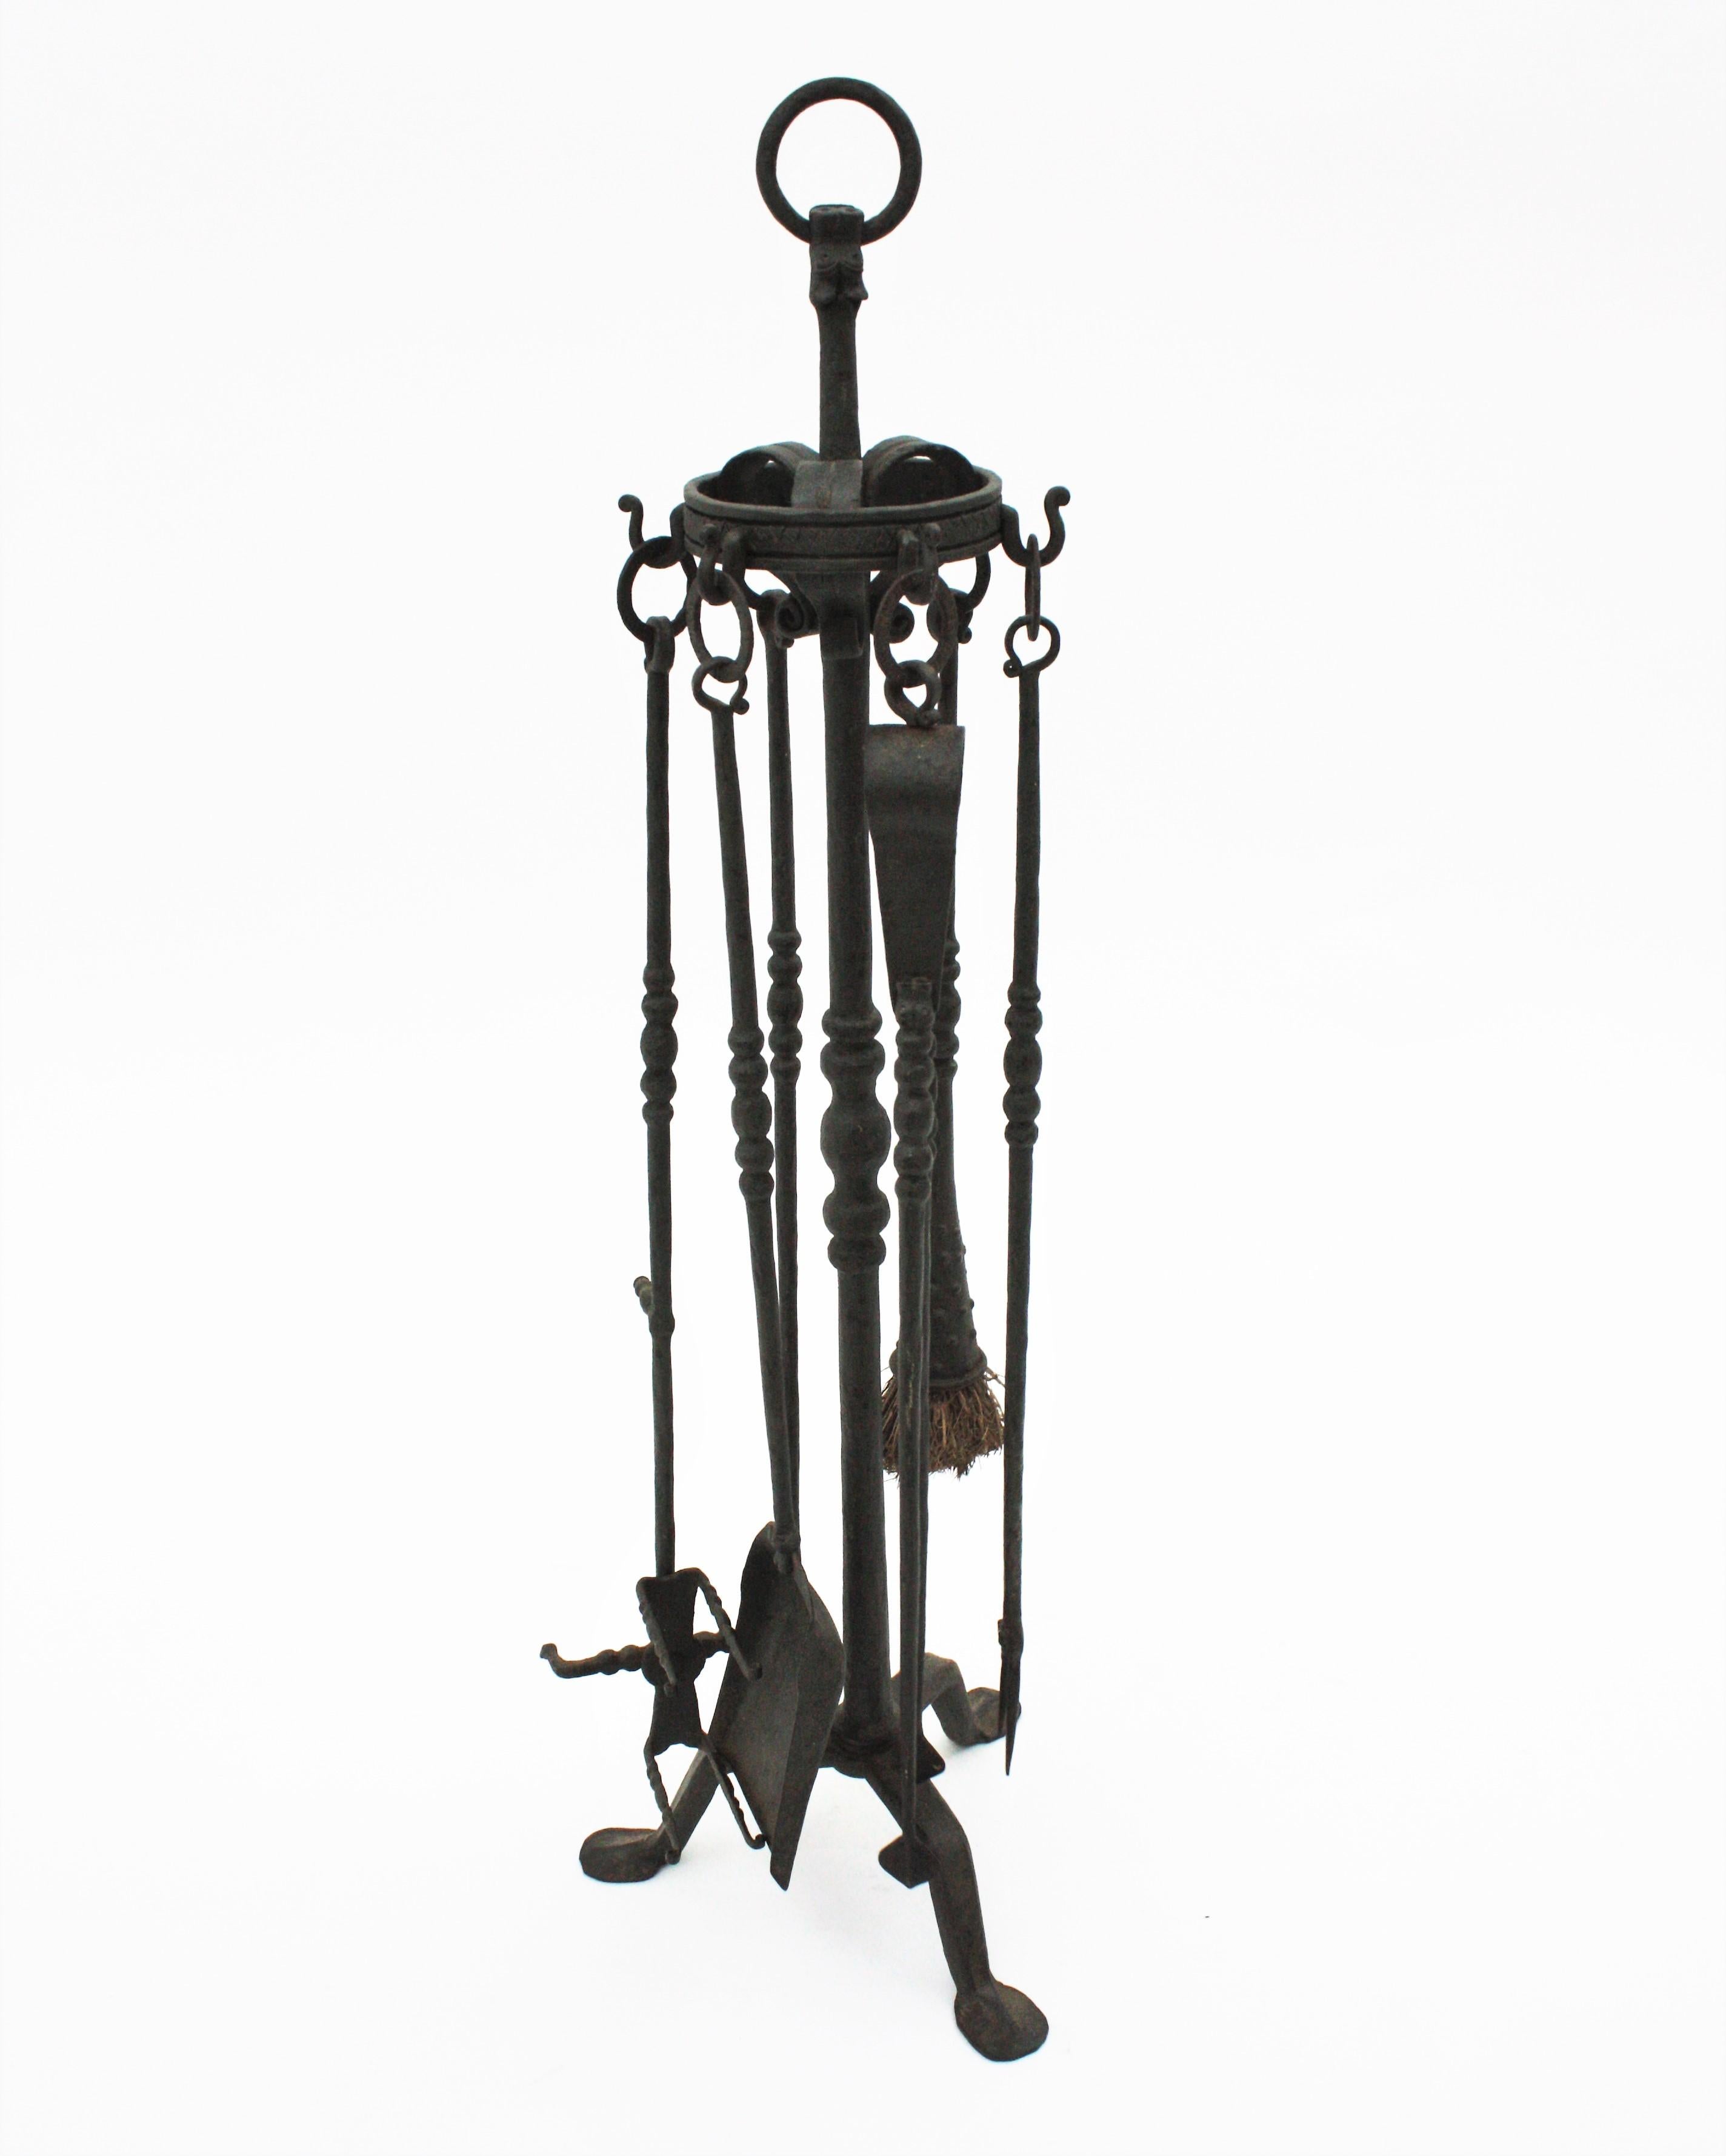 20th Century Spanish Gothic Revival Fireplace Tools Stand in Wrought Iron with Dragon Motif